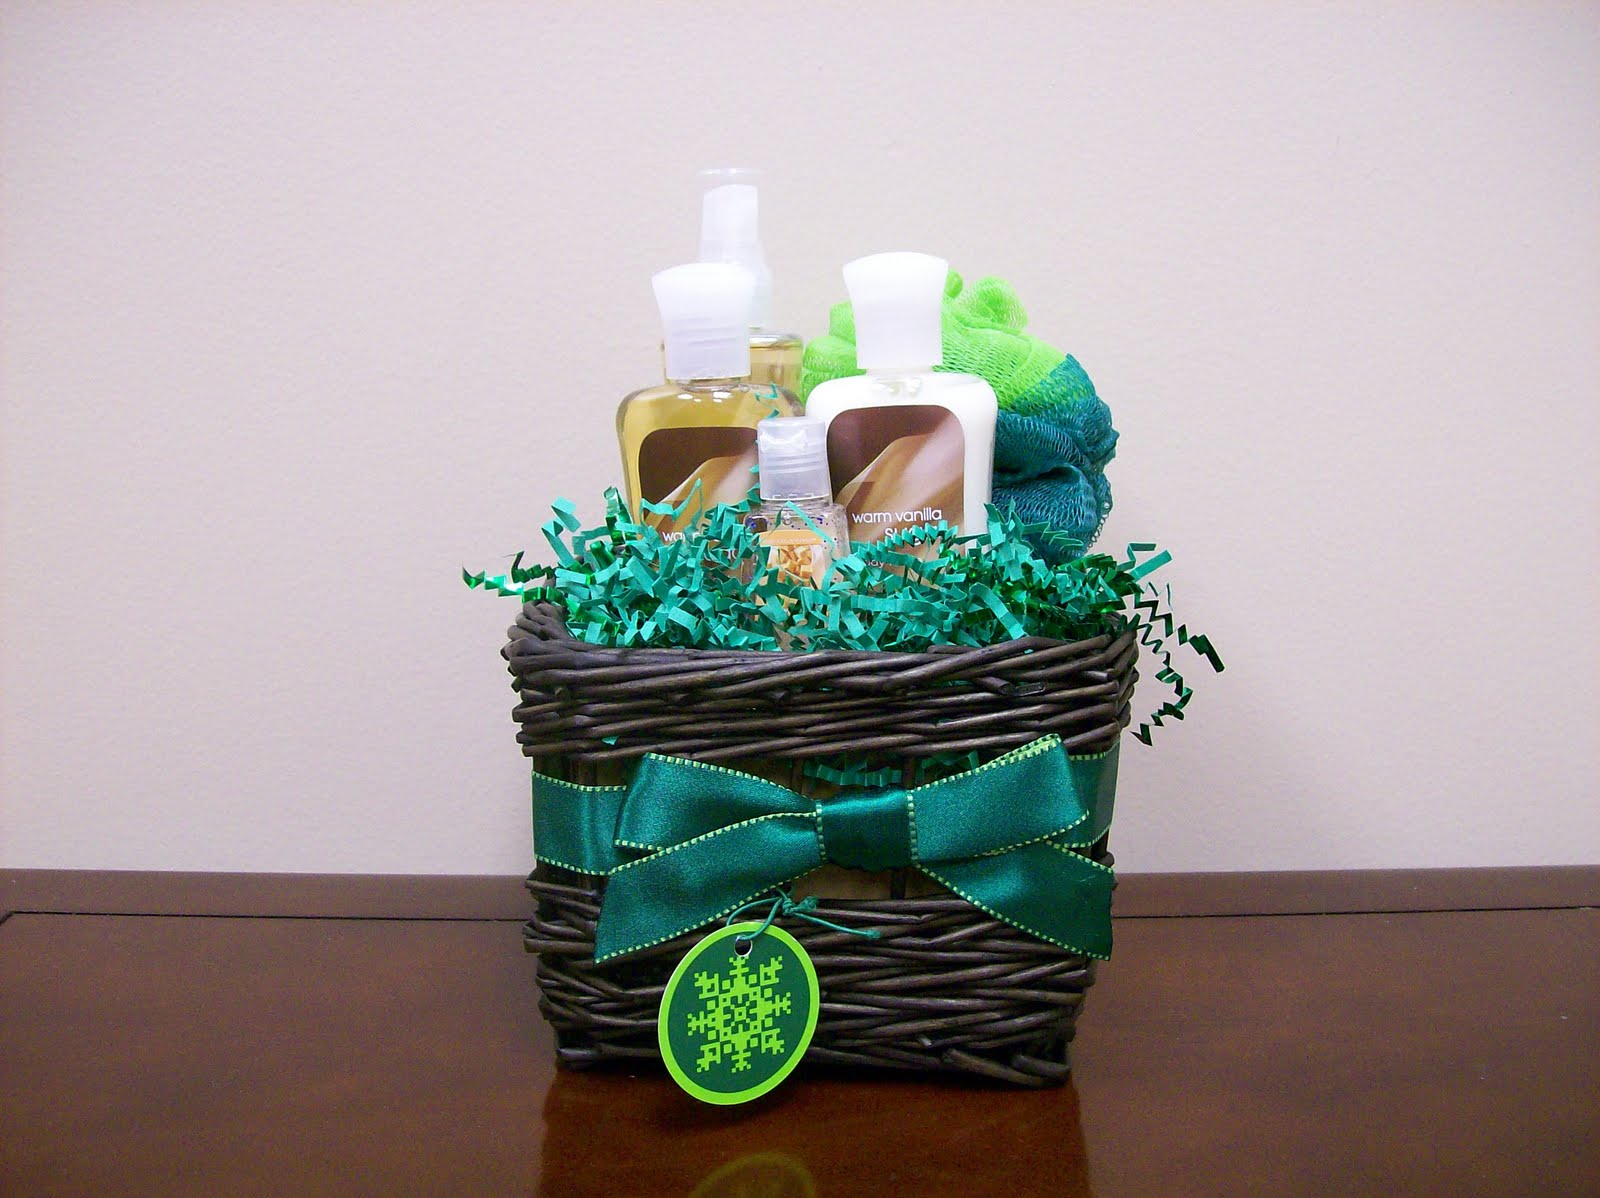 Silent Auction Bath and Body Works Basket